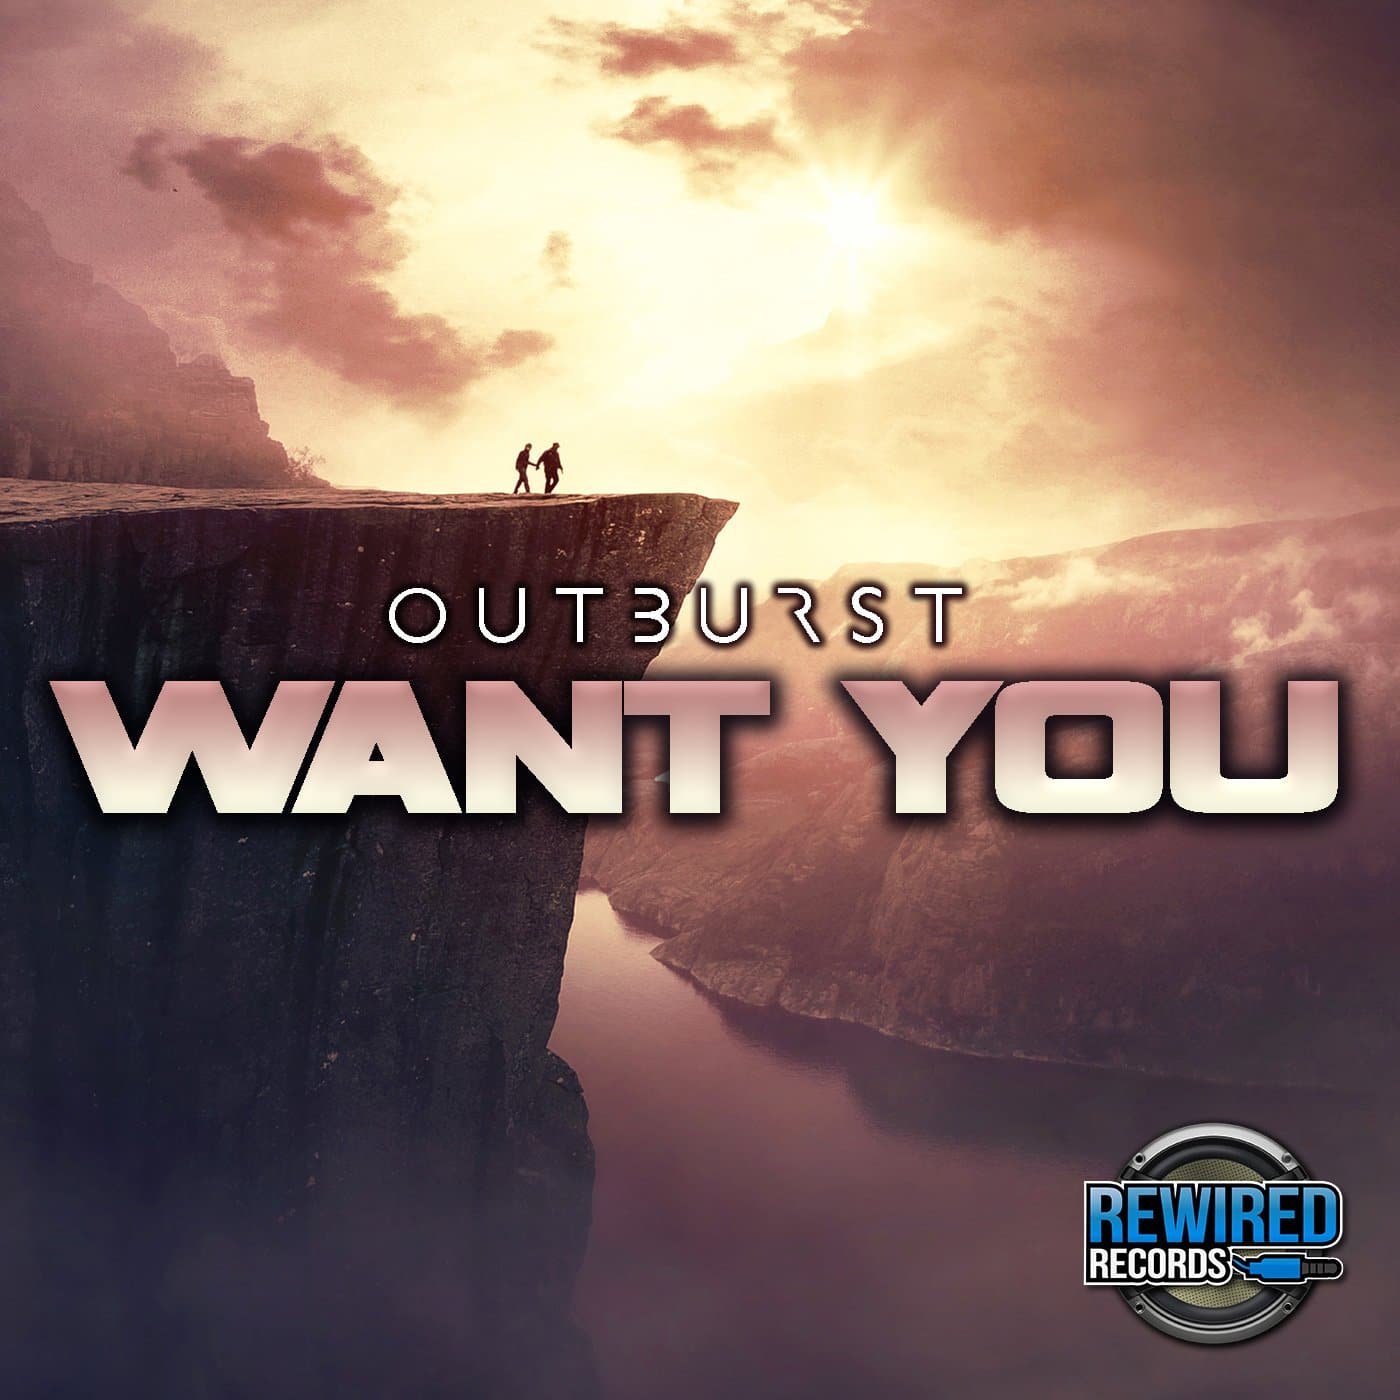 Outburst - Want You - Rewired Records